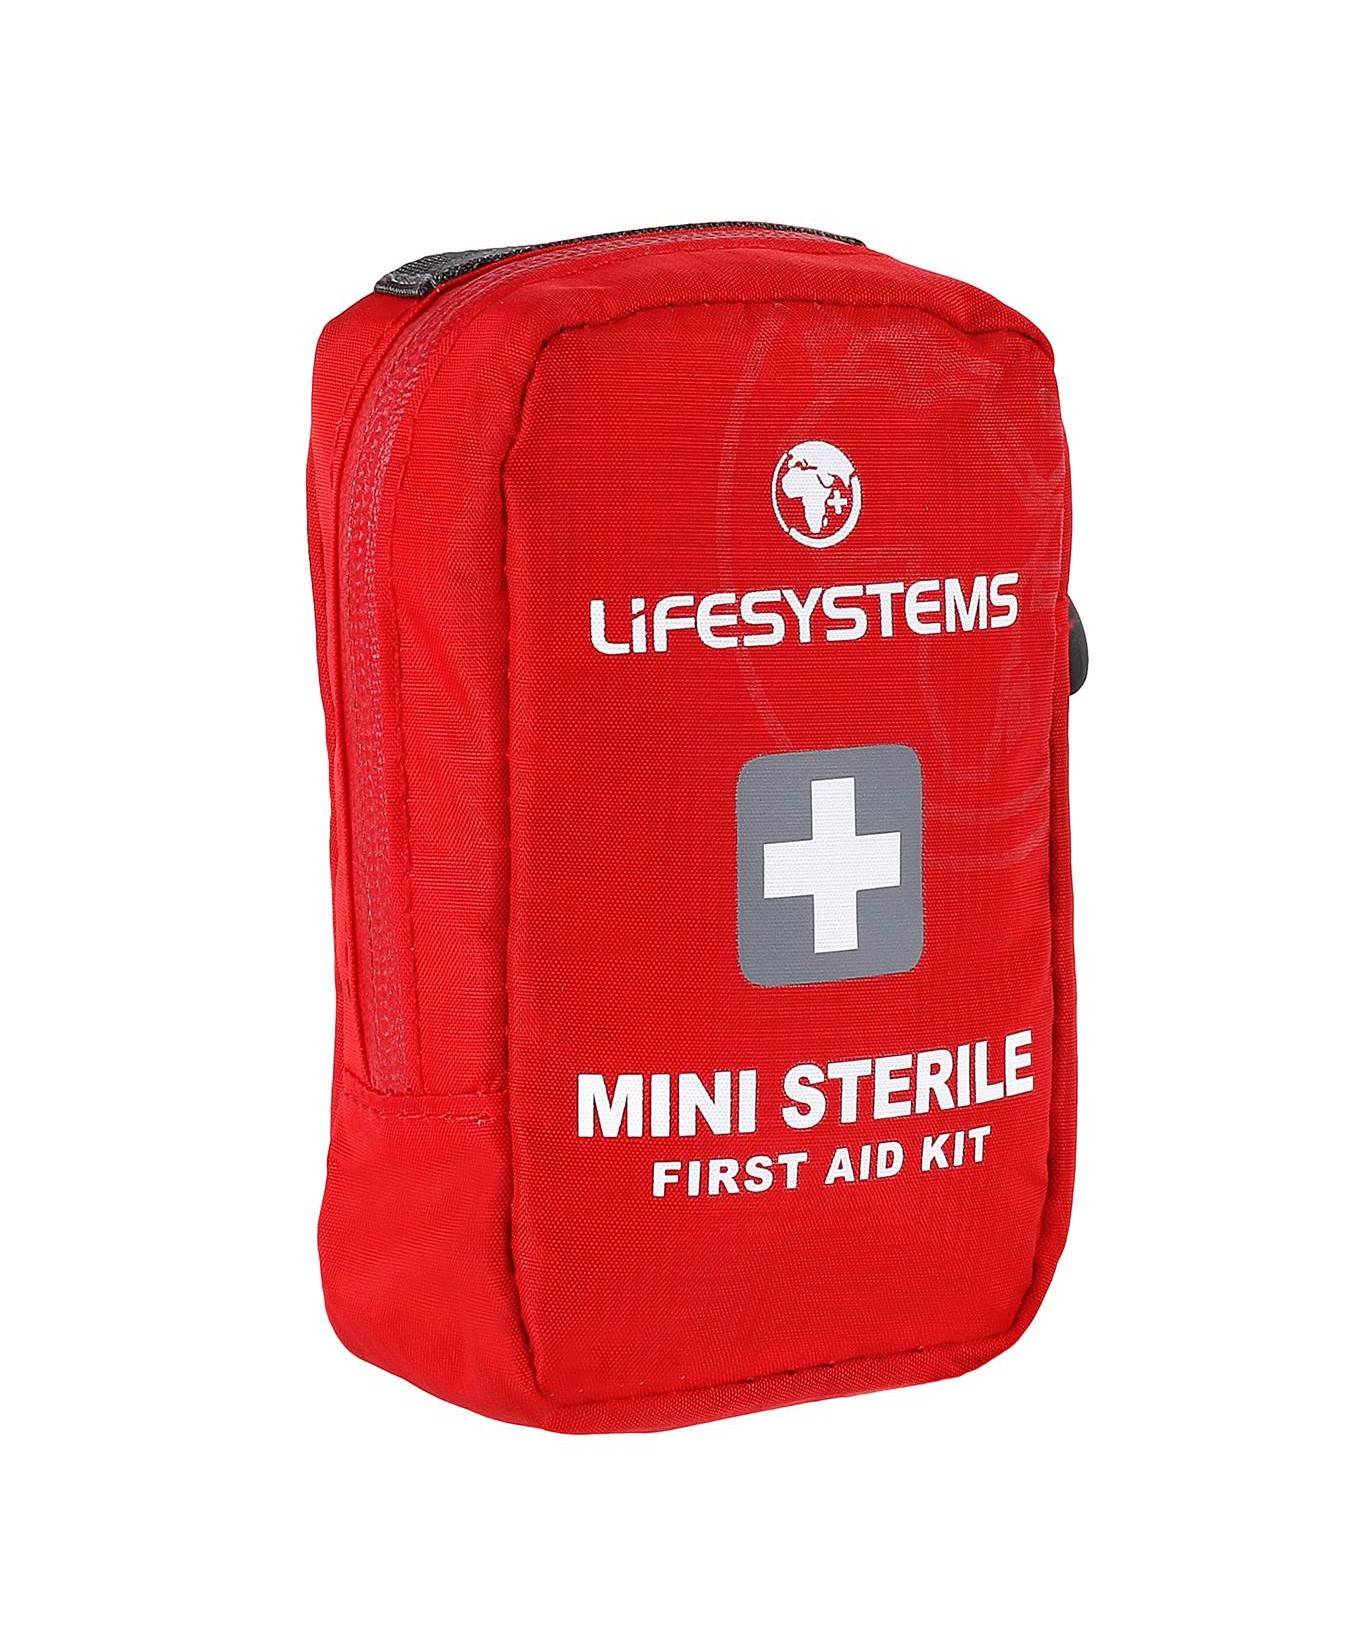 Travel first aid kit Lifesystems Mini Sterile Kit - Camping and Hiking  Travel Accessories Apteczki 